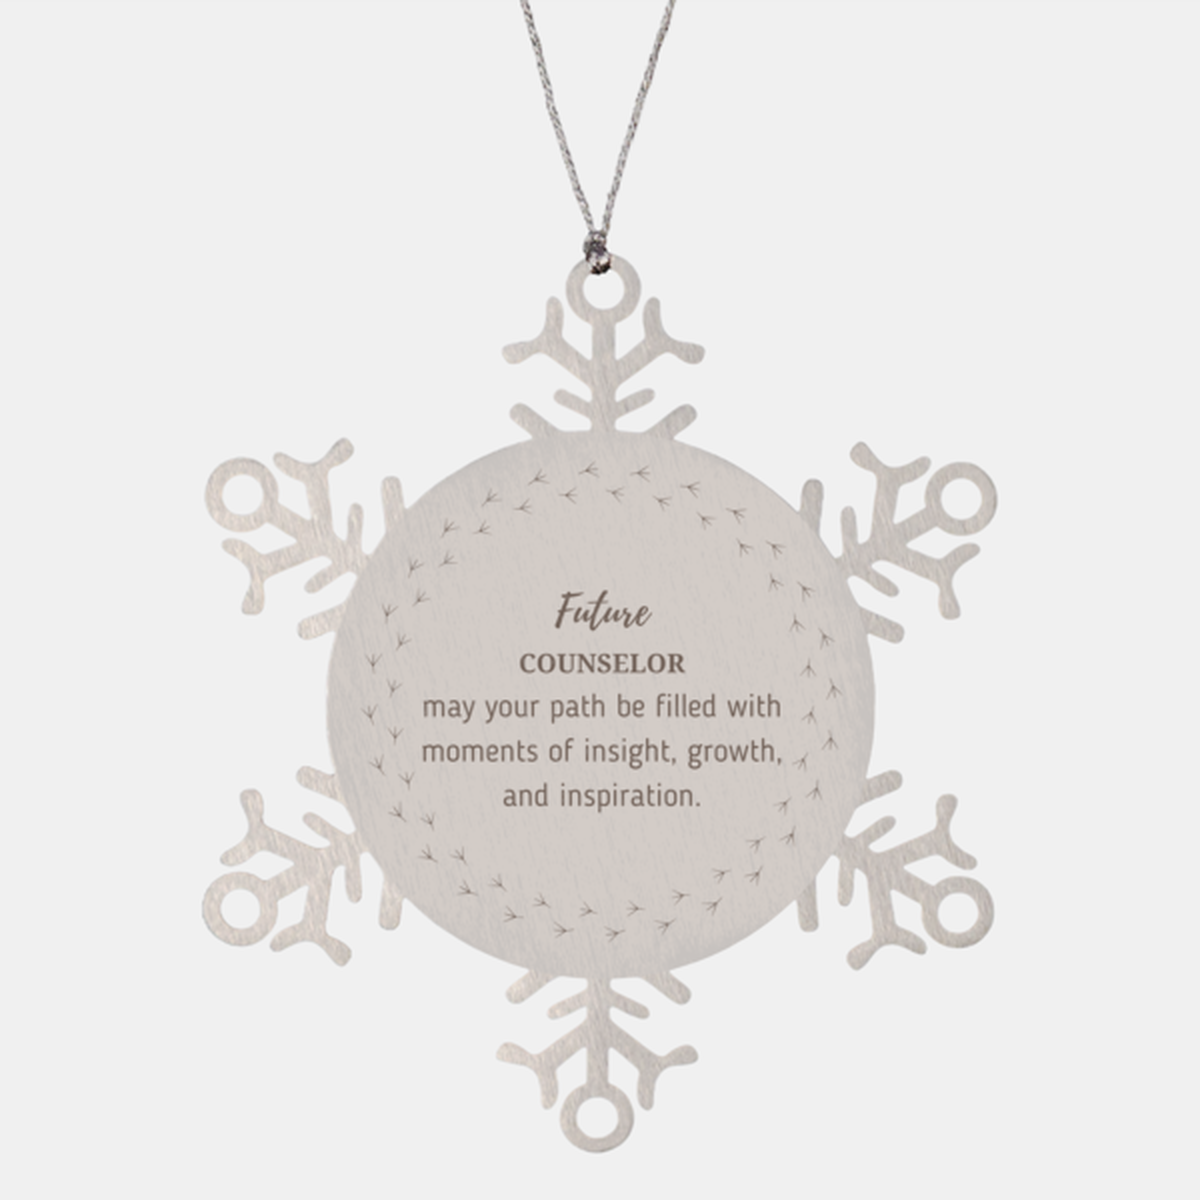 Future Counselor Gifts, May your path be filled with moments of insight, Graduation Gifts for New Counselor, Christmas Unique Snowflake Ornament For Men, Women, Friends